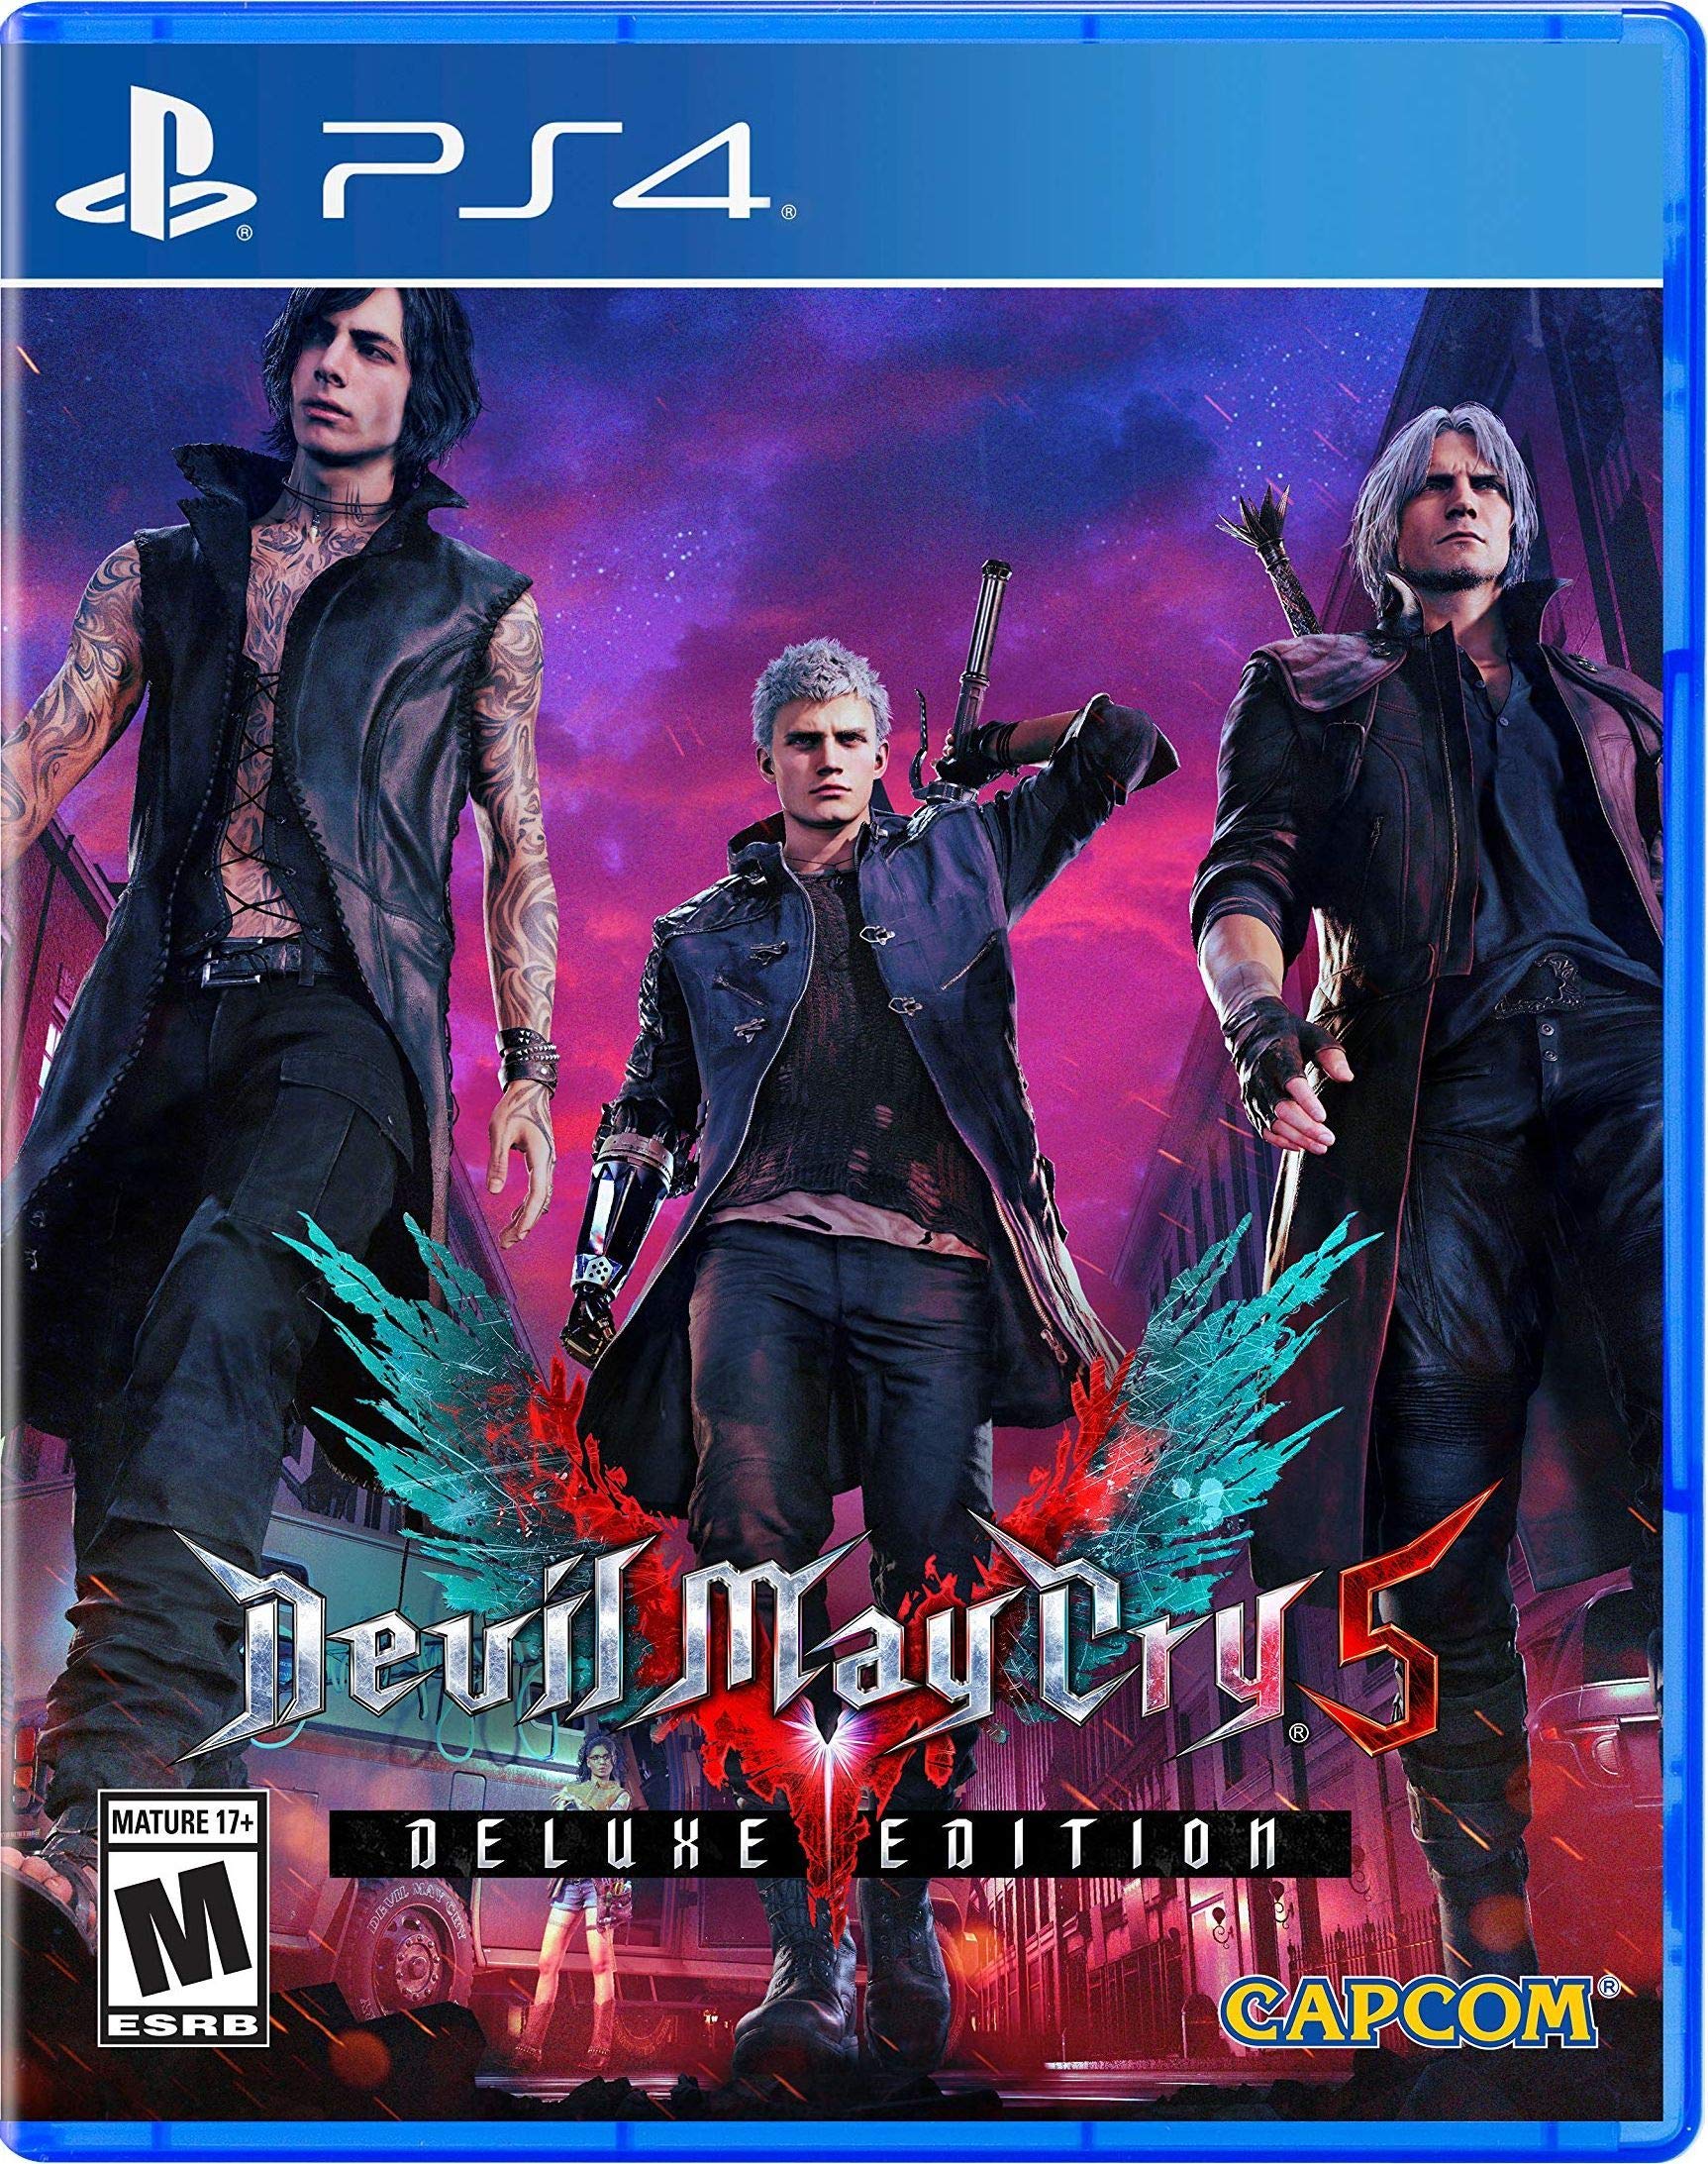 Download Devil May Cry 5 Deluxe Edition Game for PC